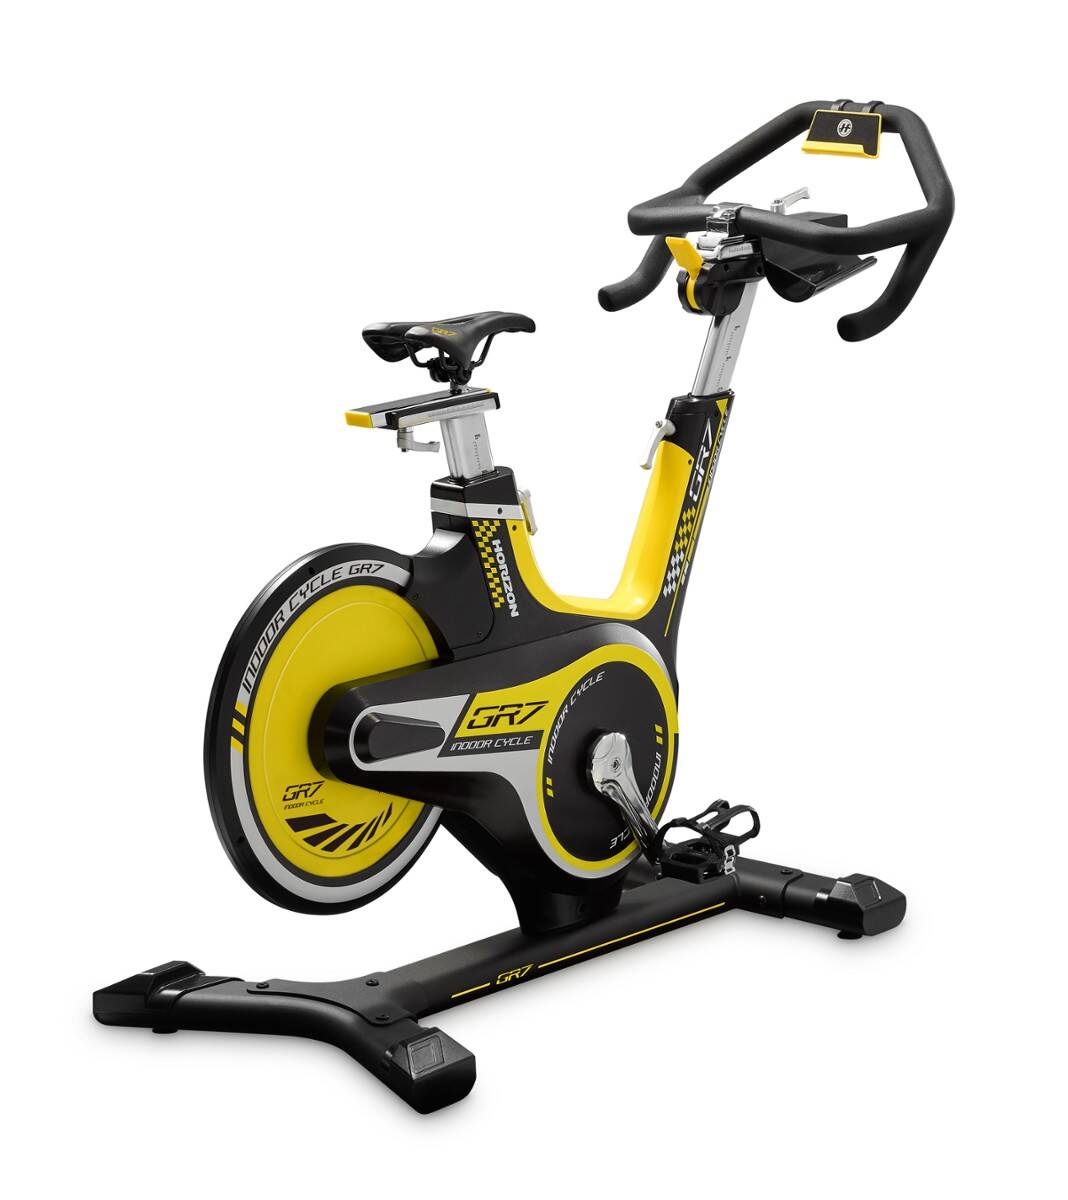 Rower Spiningowy GR7 Viewfit 100913 Horizon Fitness (Photo 2)